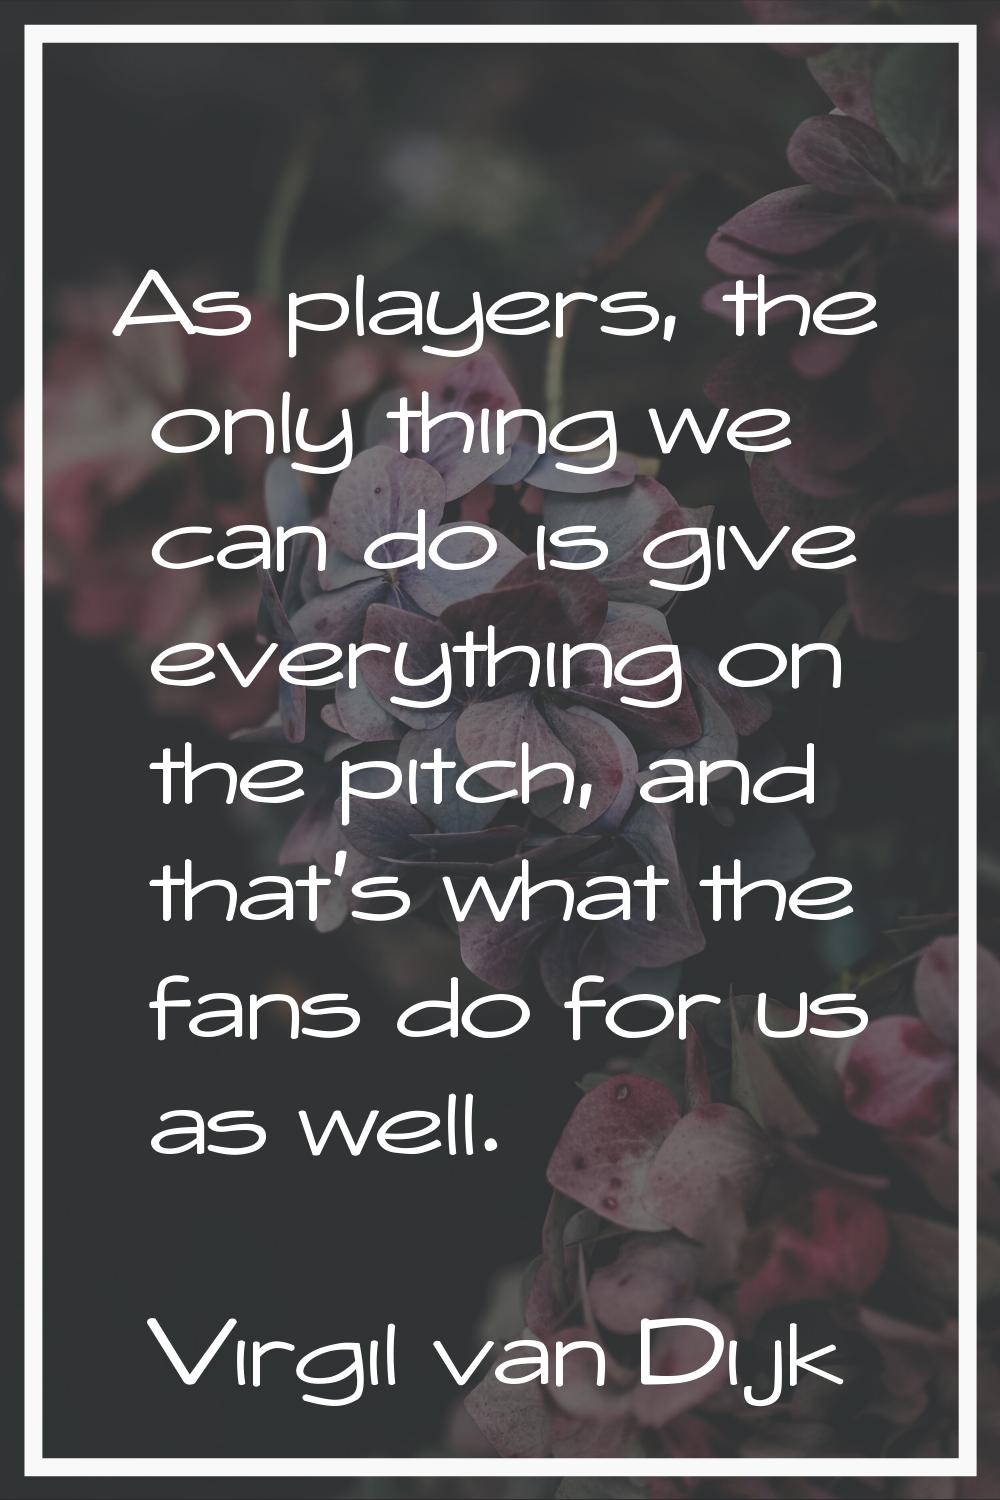 As players, the only thing we can do is give everything on the pitch, and that's what the fans do f